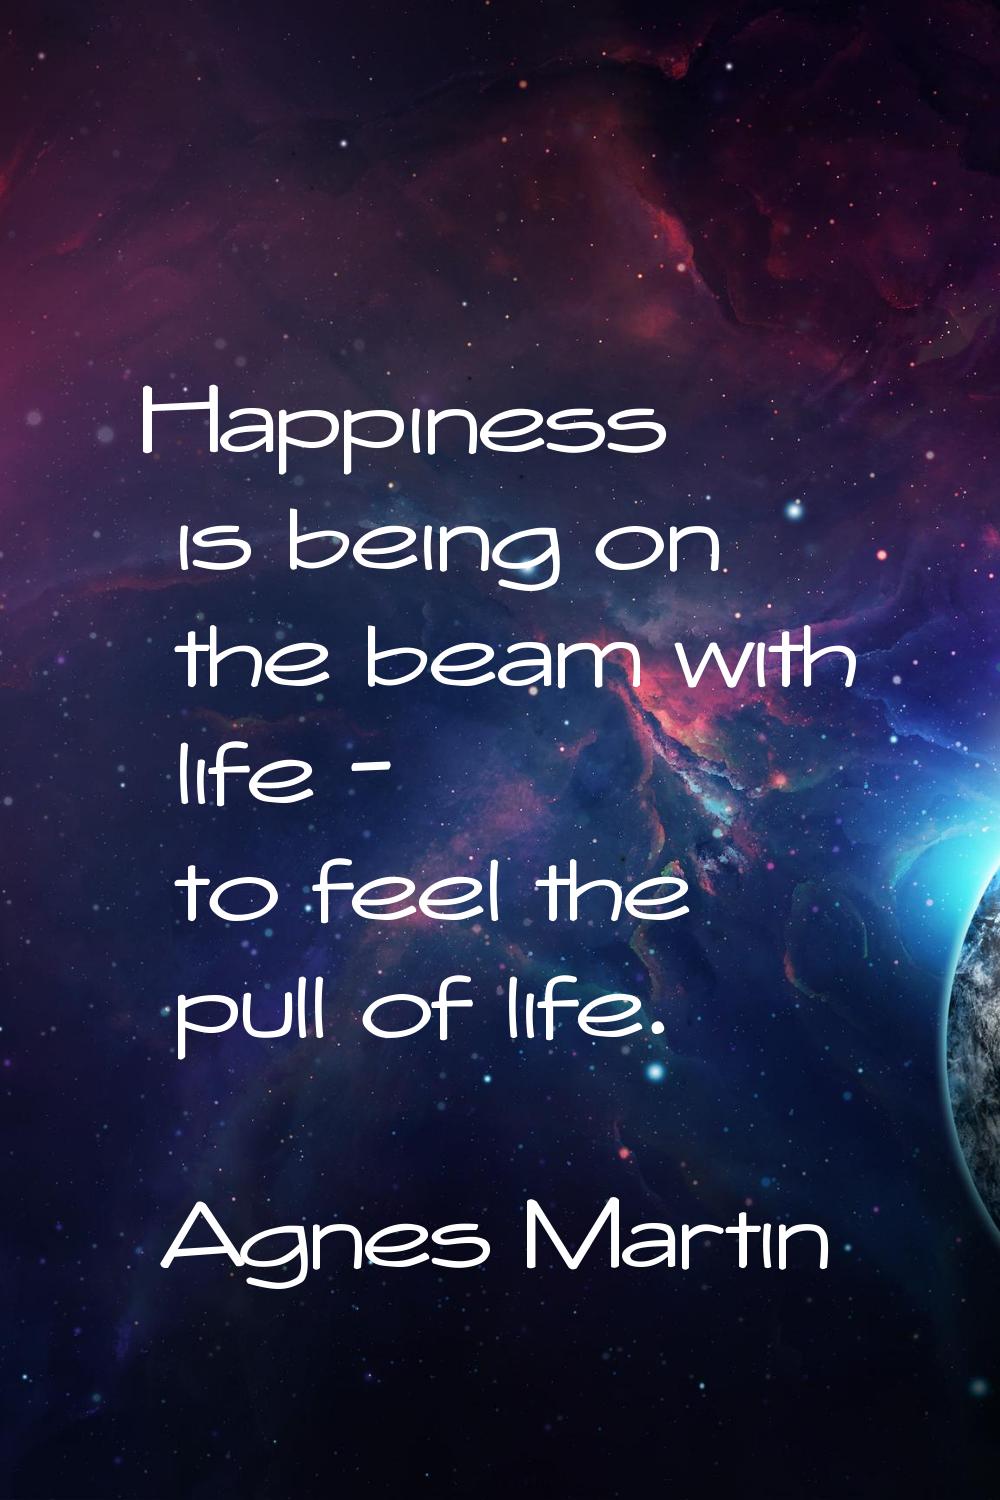 Happiness is being on the beam with life - to feel the pull of life.